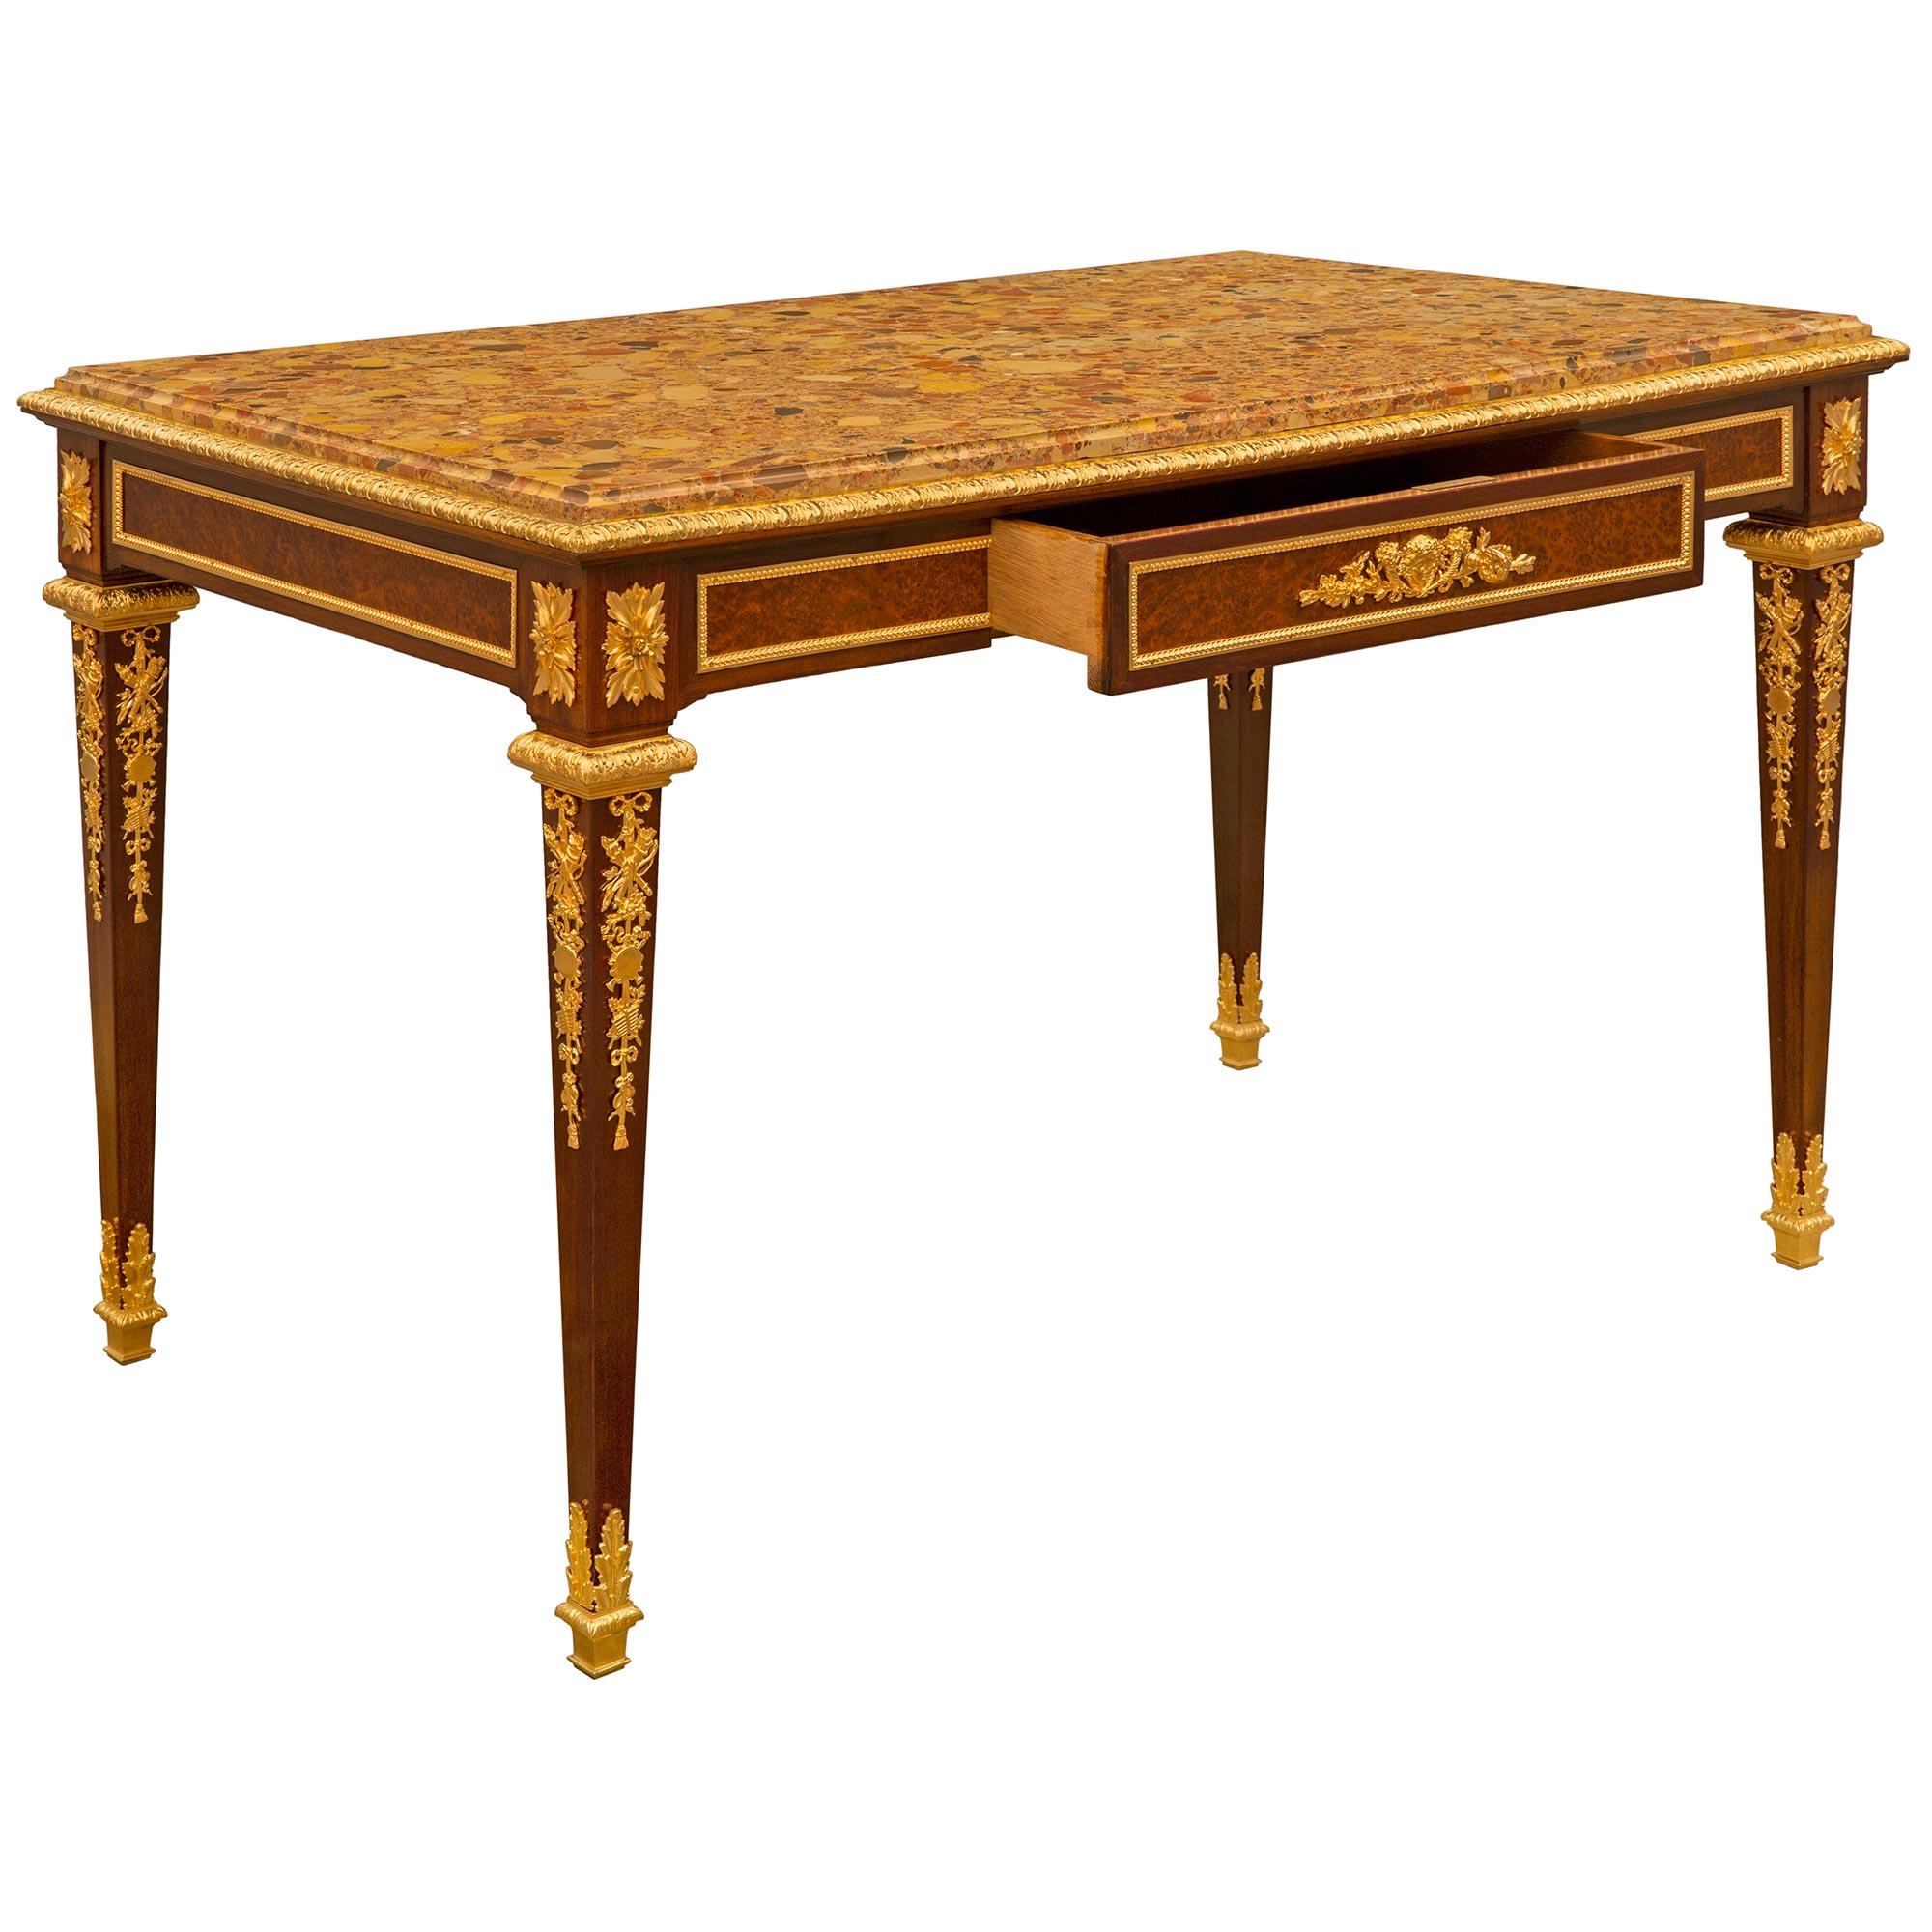 Ormolu French 19th Century Louis XVI St. Belle Époque Period Table Attributed to Linke For Sale